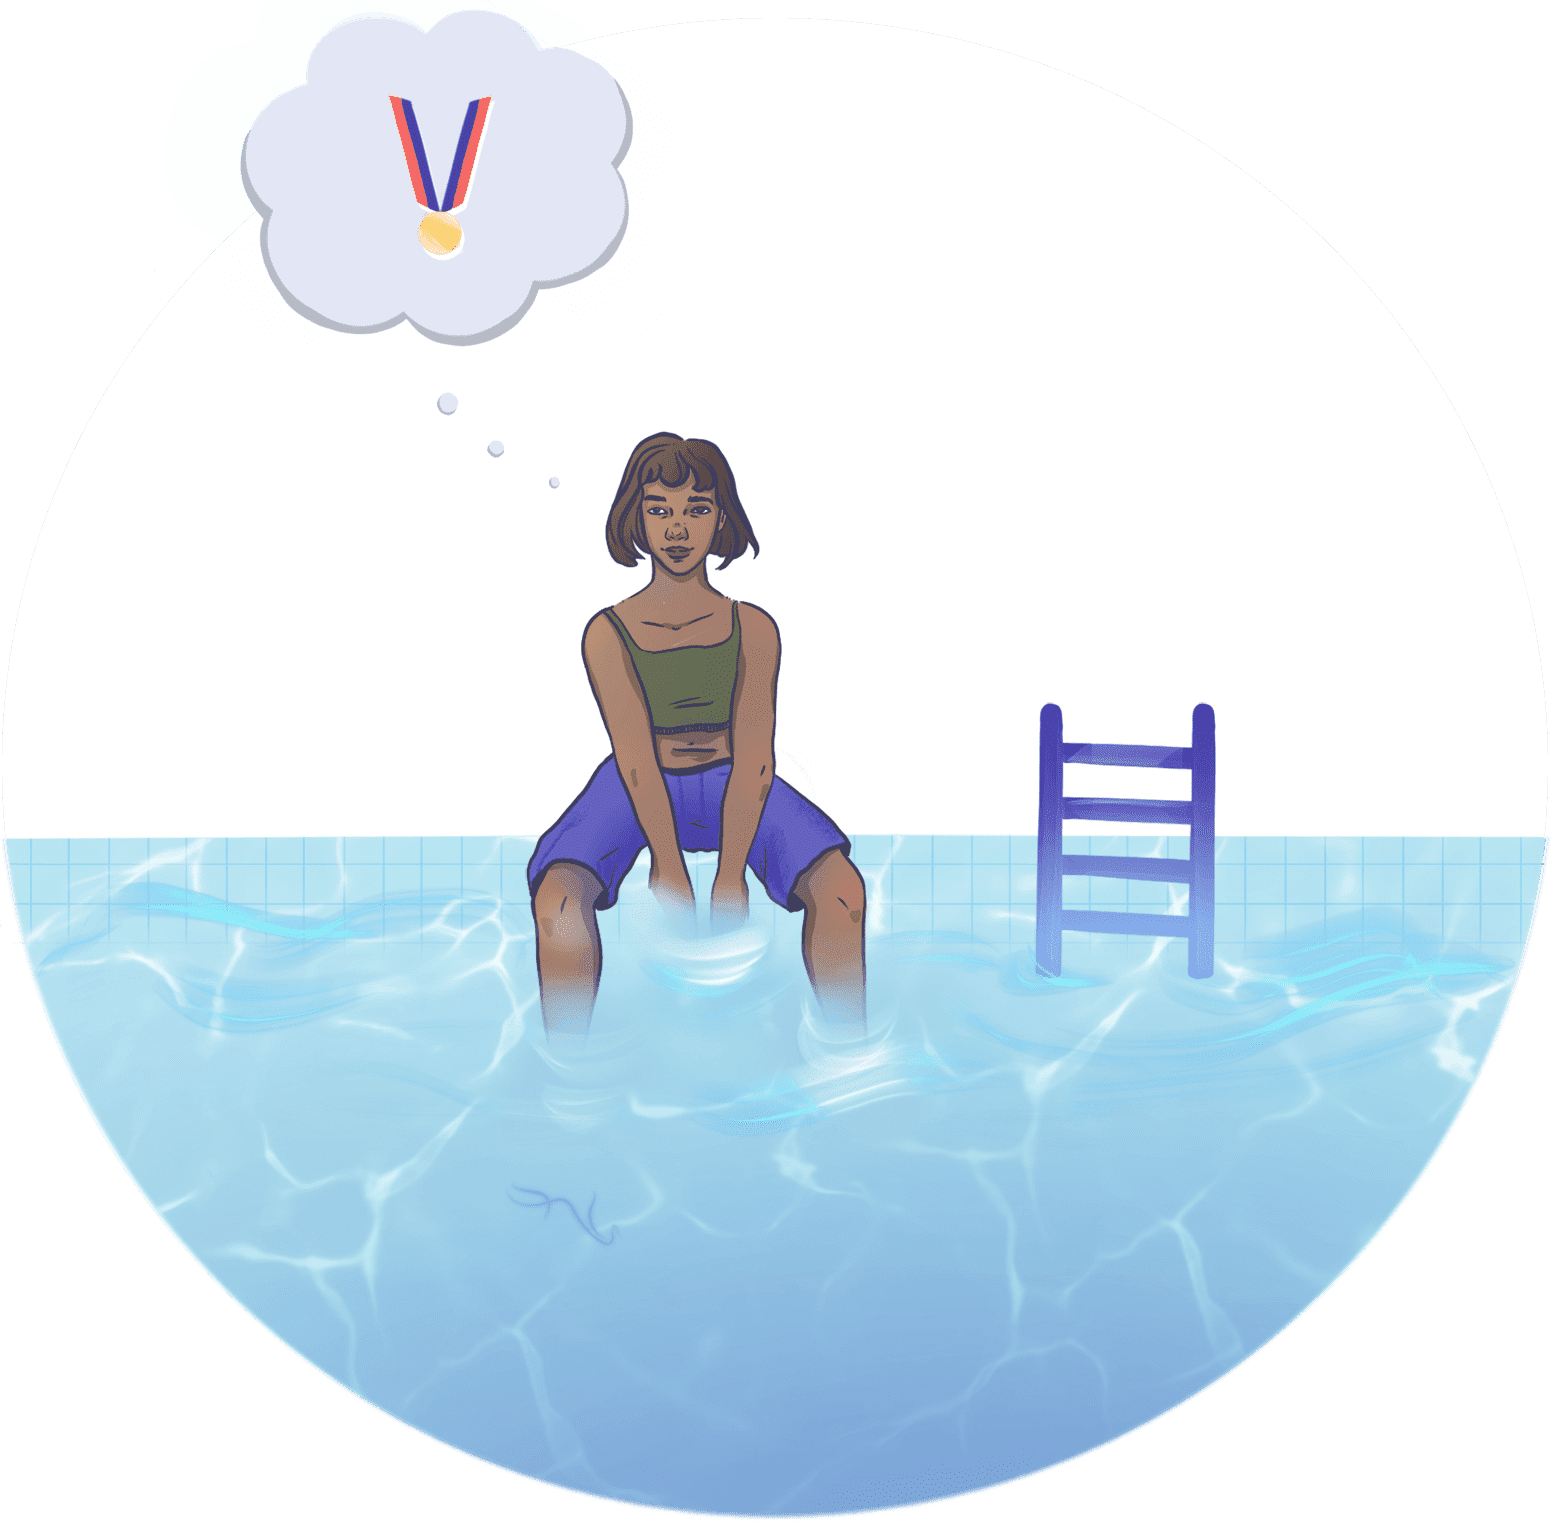 Illustration of a swimmer sitting by swimming pool. A thought bubble shows the swimmer fantasizing about winning a gold medal